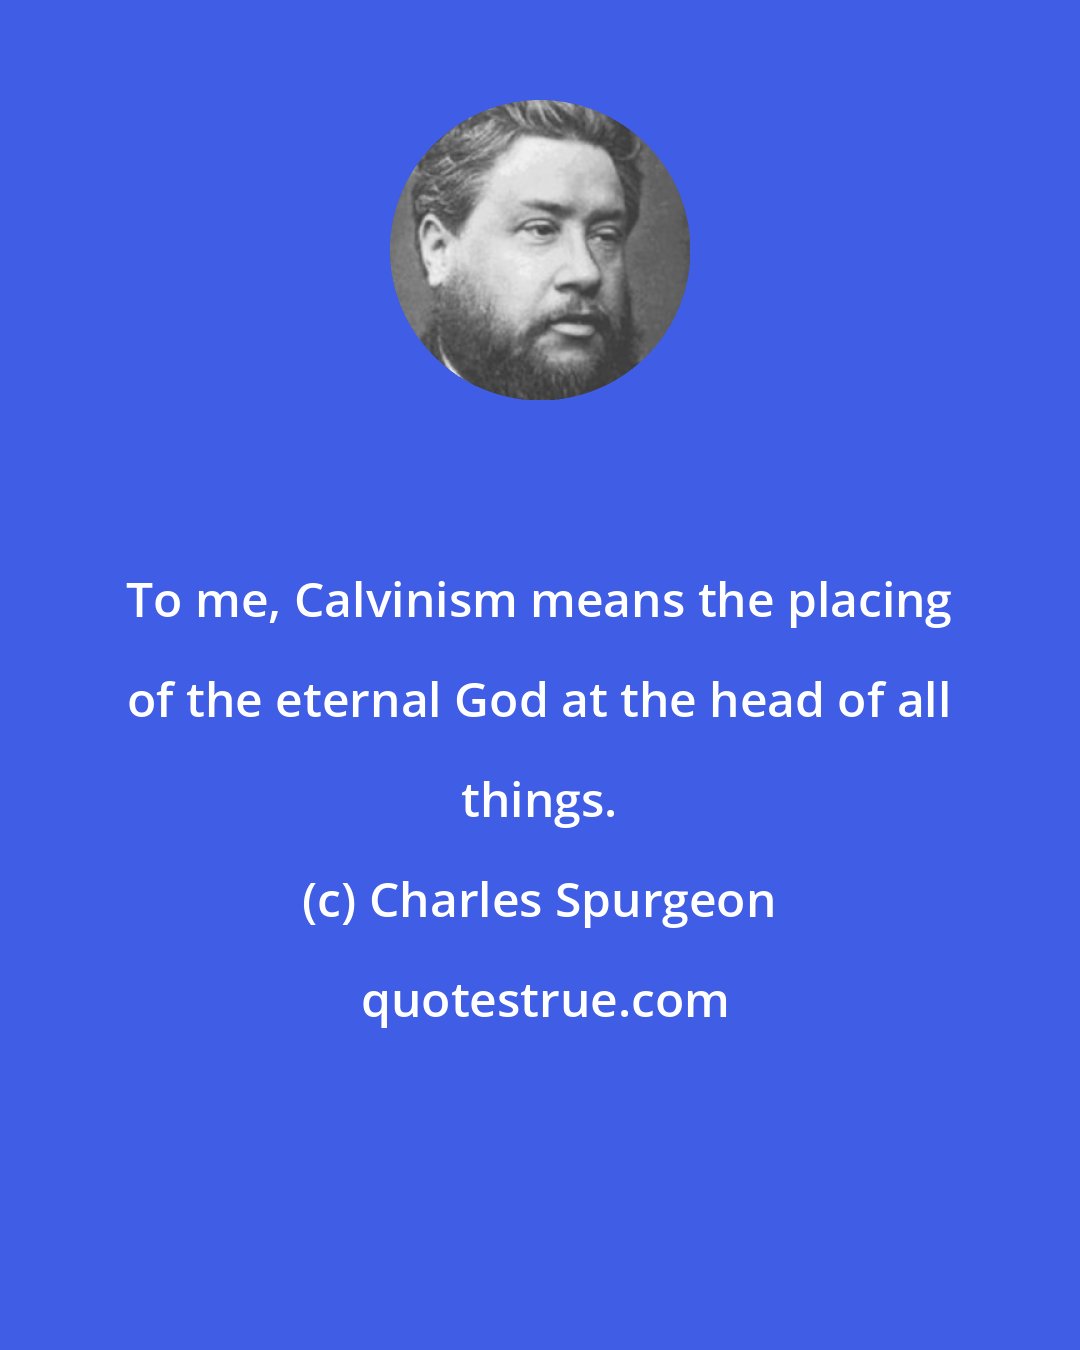 Charles Spurgeon: To me, Calvinism means the placing of the eternal God at the head of all things.